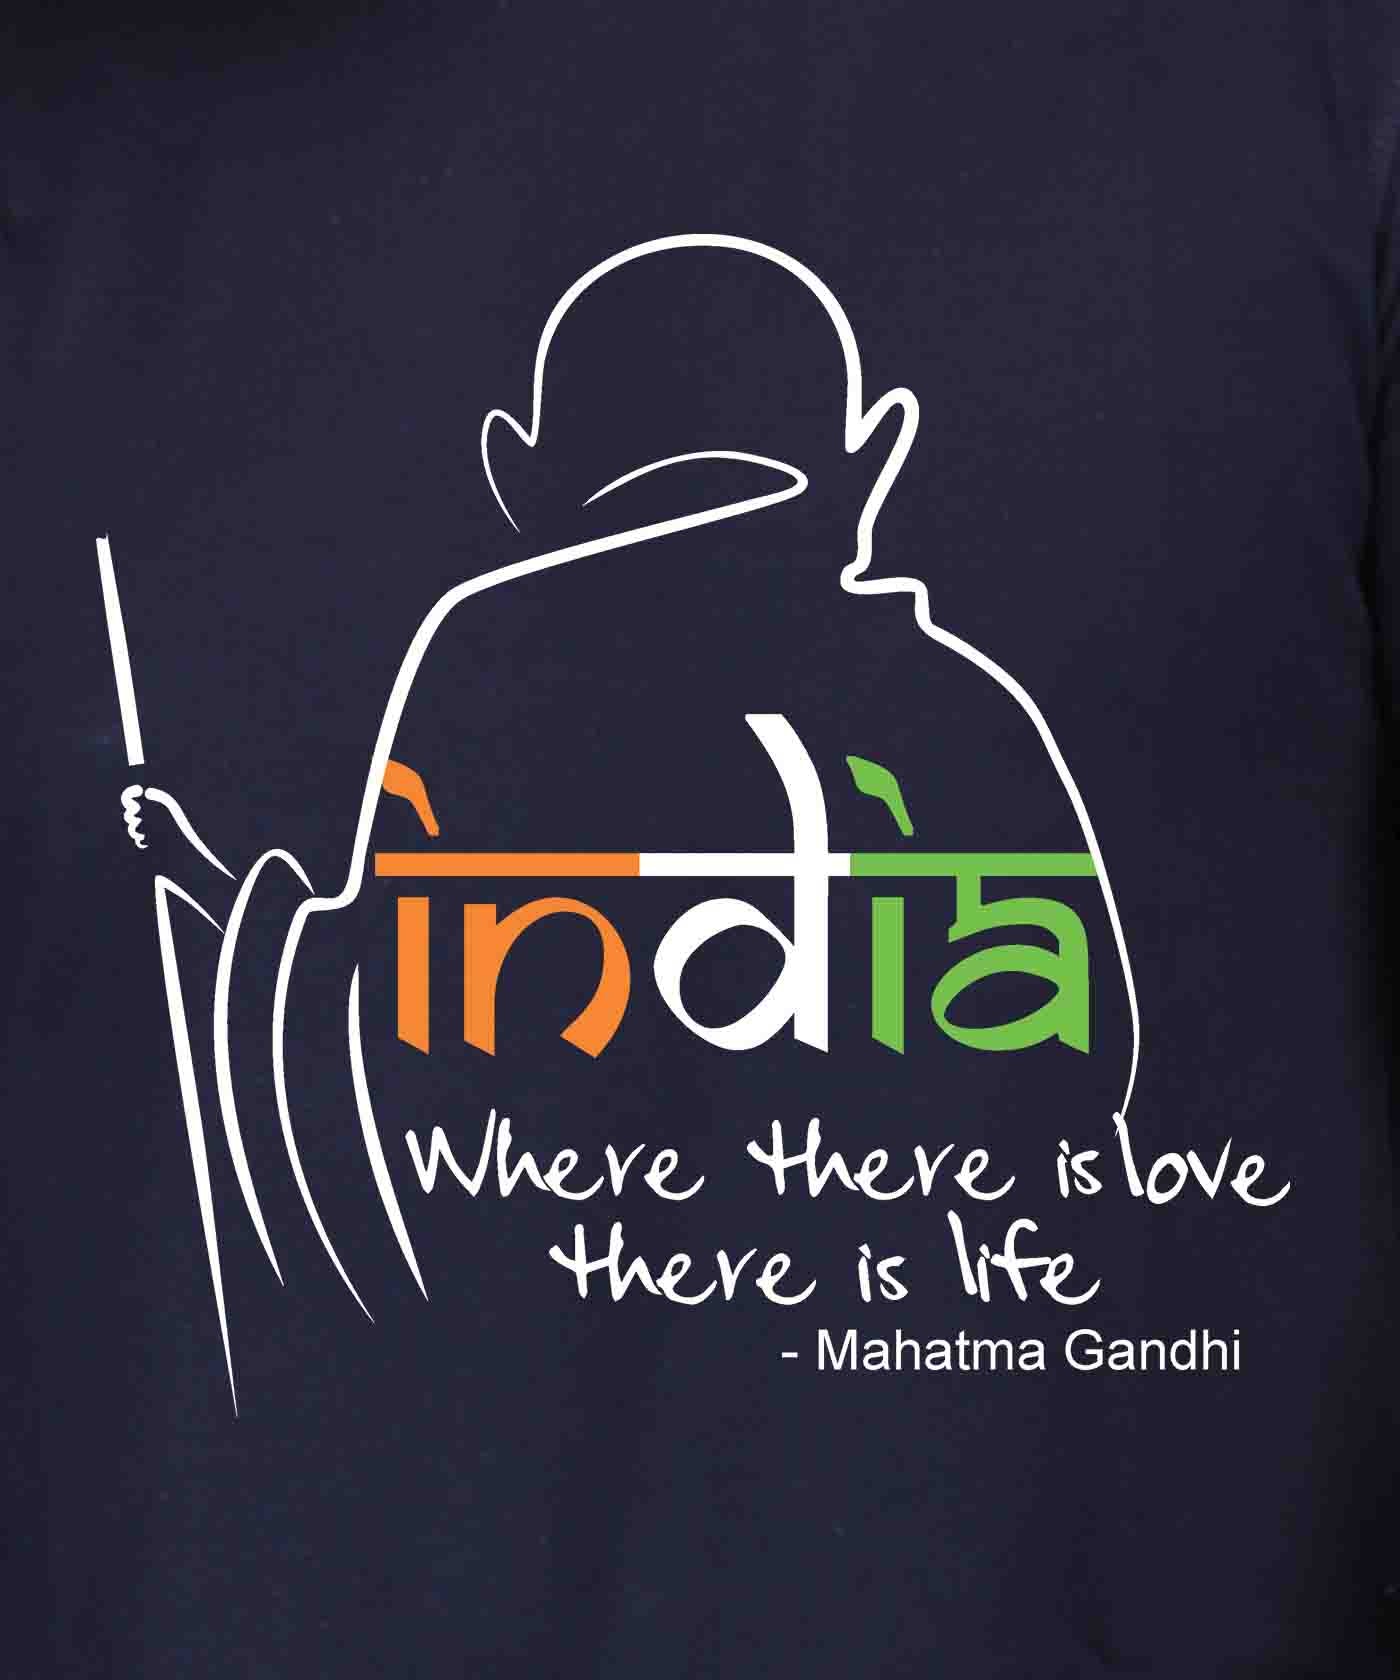 India Where There is Love - Premium Round Neck Cotton Tees for Men - Navy Blue